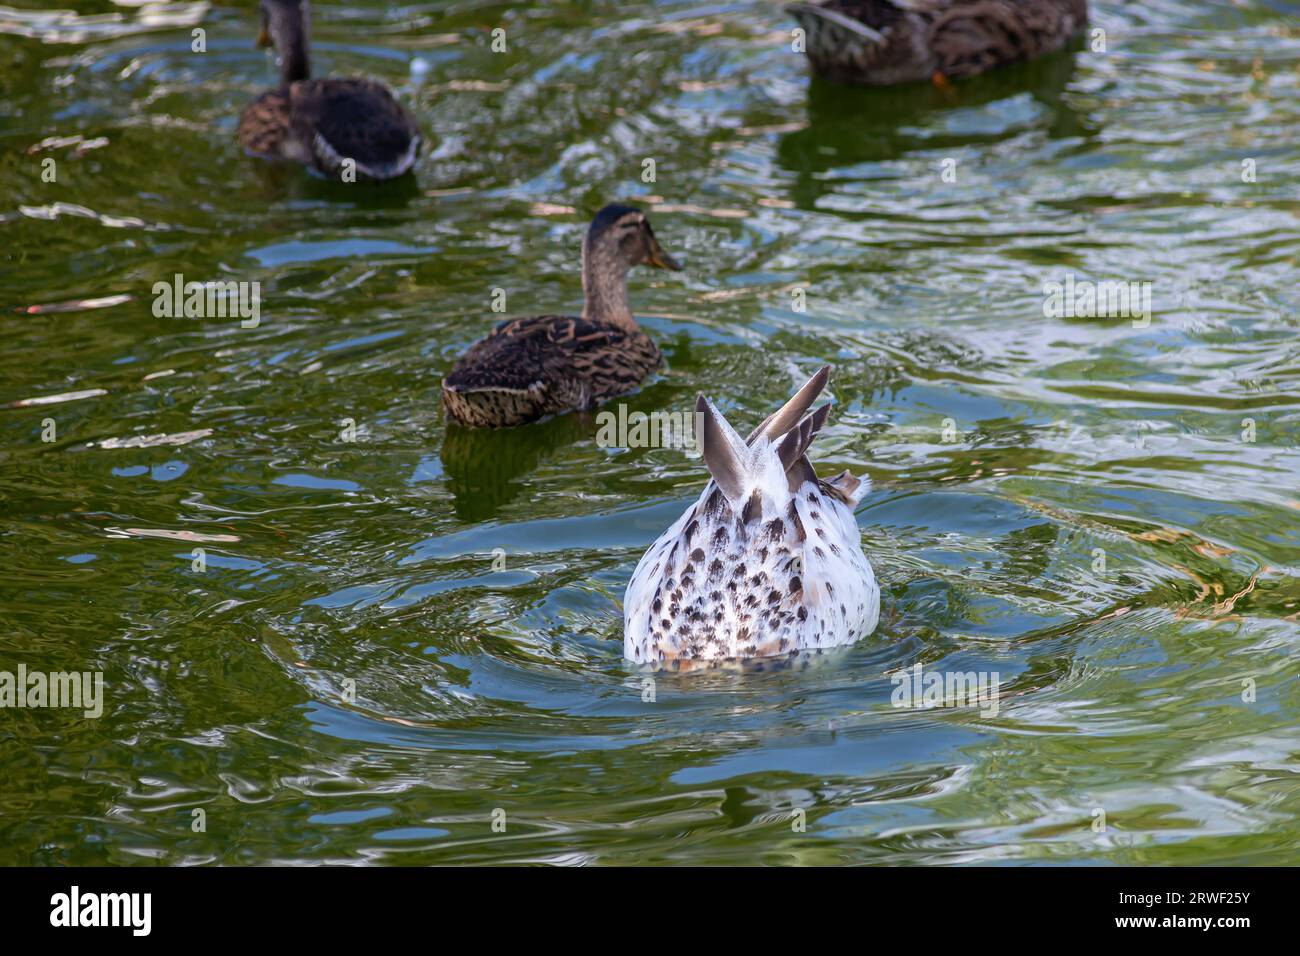 A large flock of ducks eats abandoned bread on the lake, Ducks and drakes swim on the water. Stock Photo